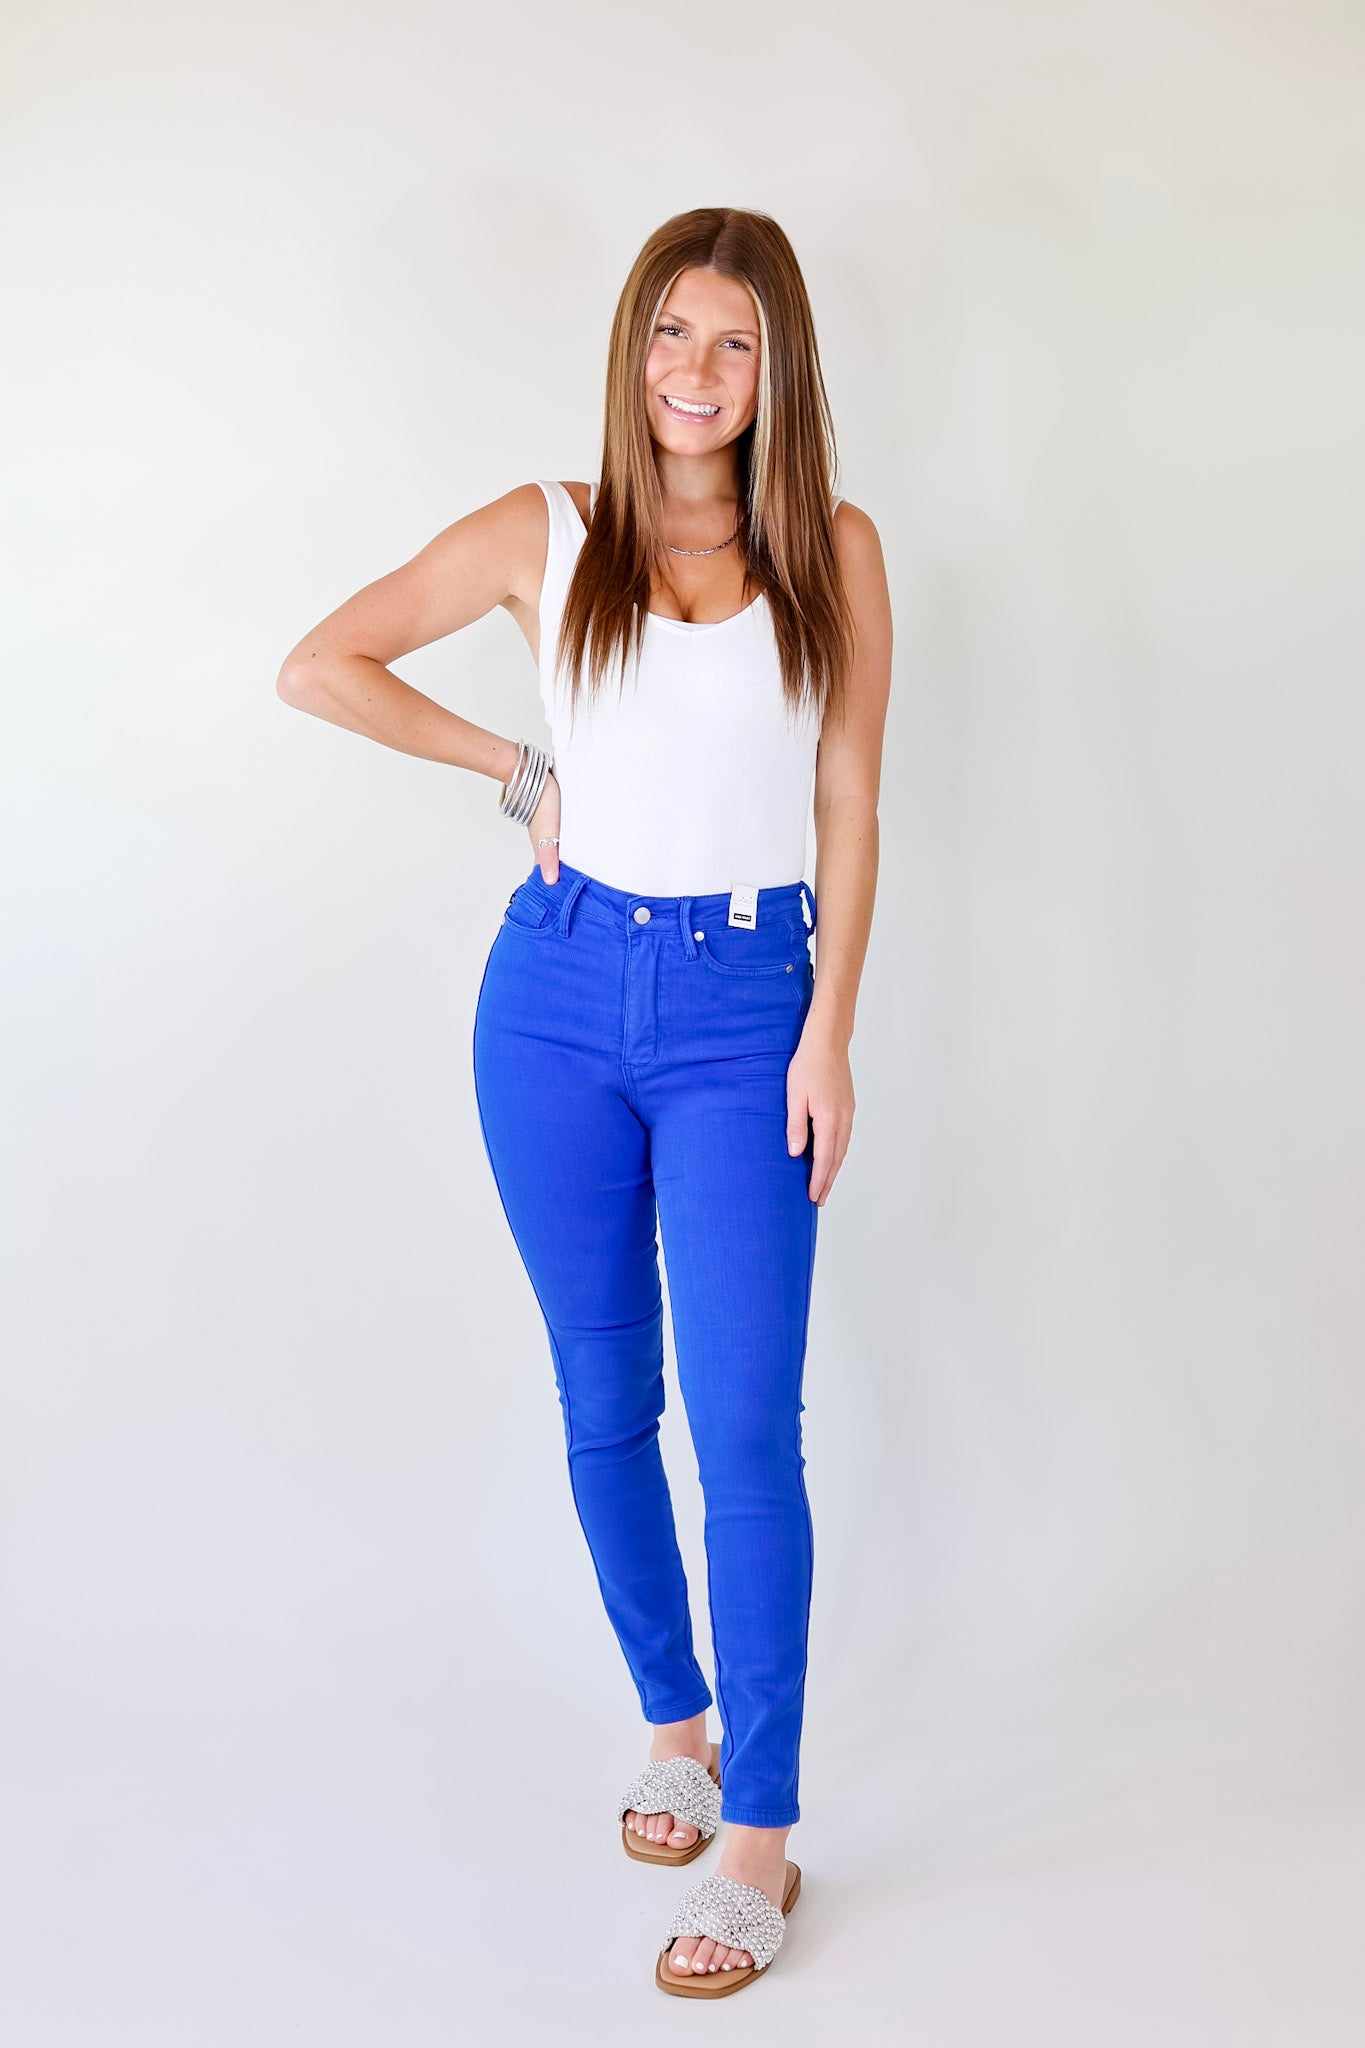 Judy Blue | Vibrant Smiles Control Top Skinny Jeans in Cobalt Blue - Giddy Up Glamour Boutique